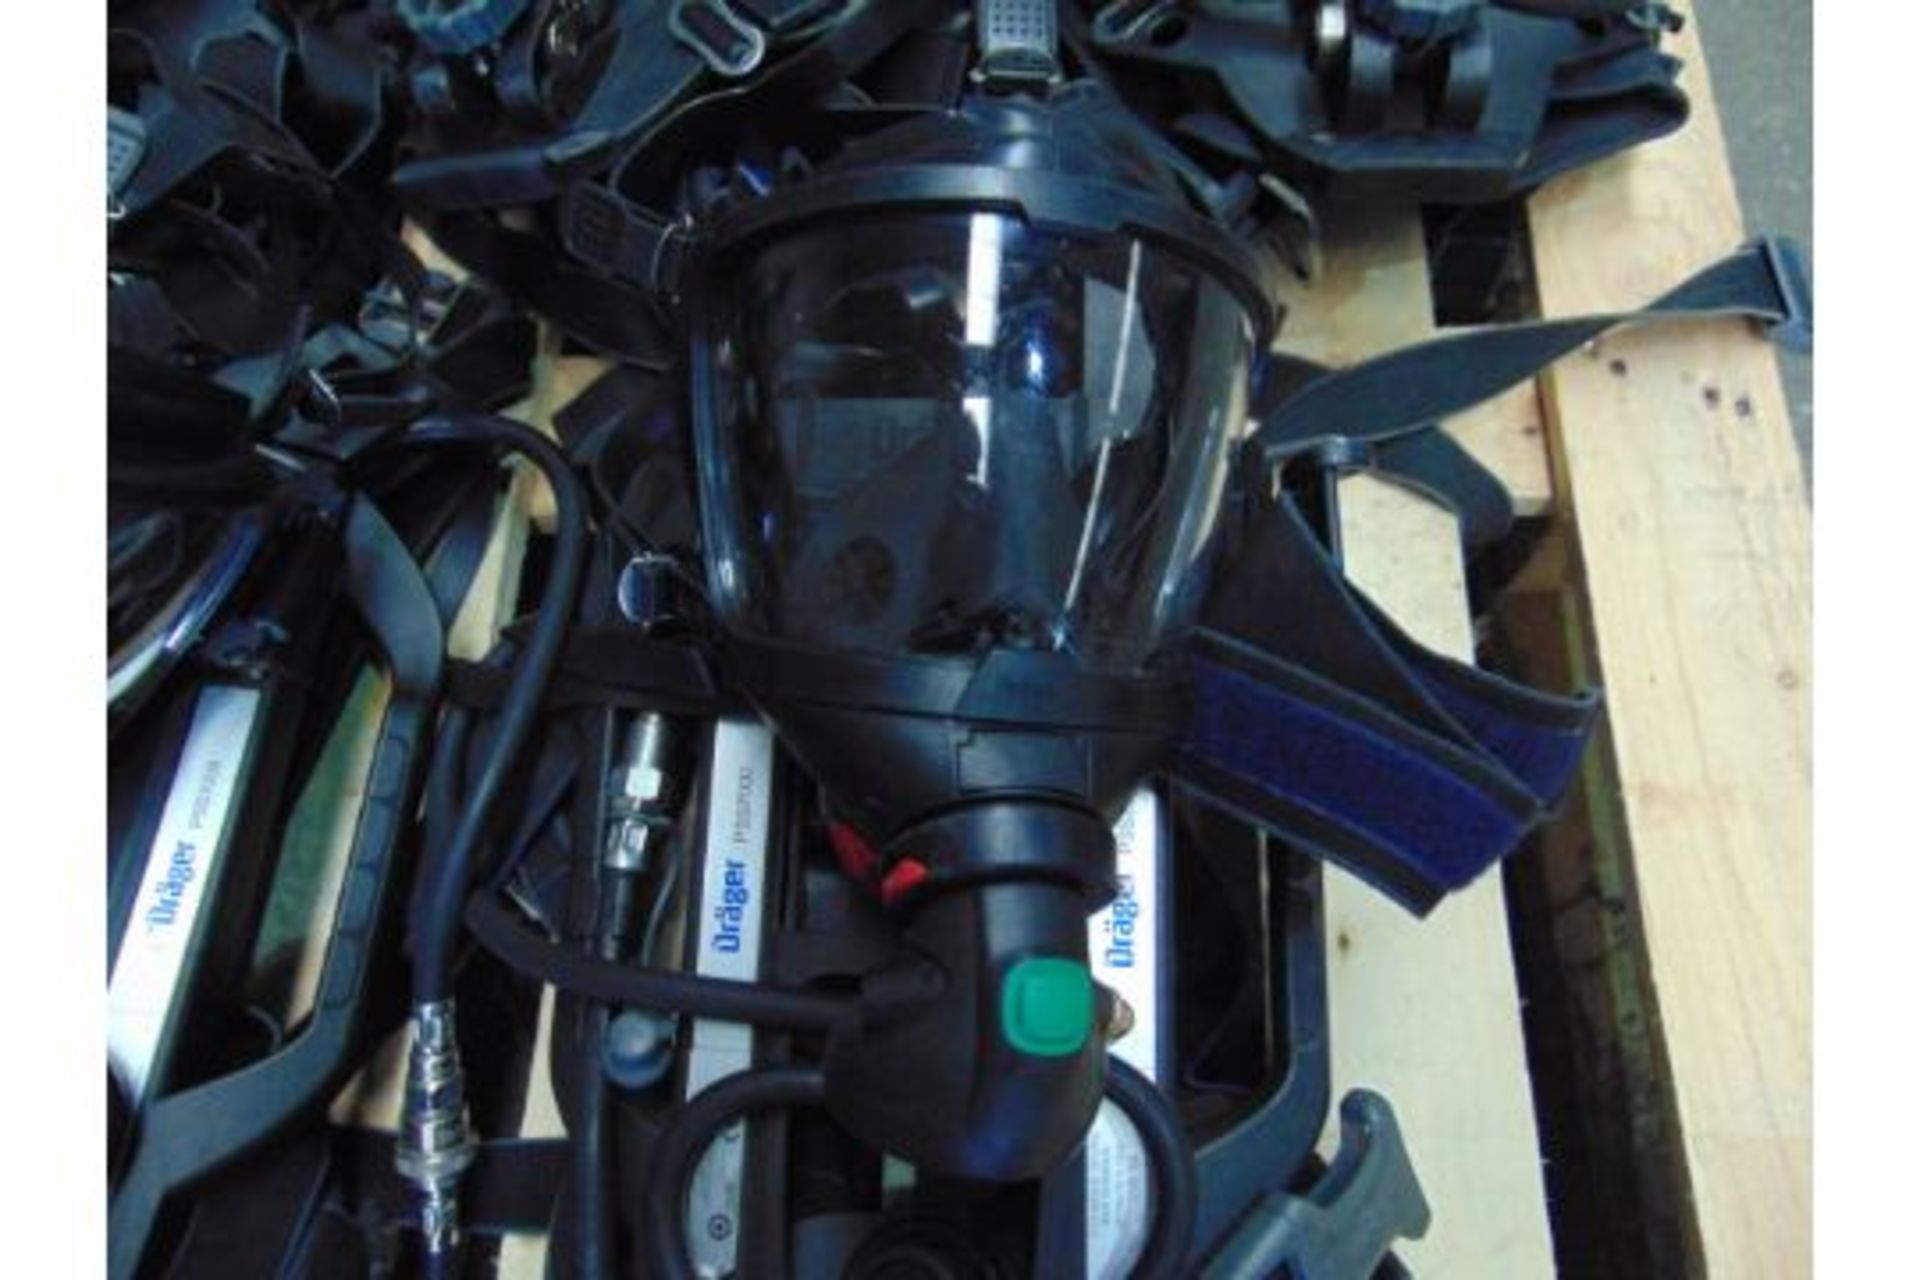 5 x Drager PSS 7000 Self Contained Breathing Apparatus w/ 10 x Drager 300 Bar Air Cylinders - Image 11 of 22